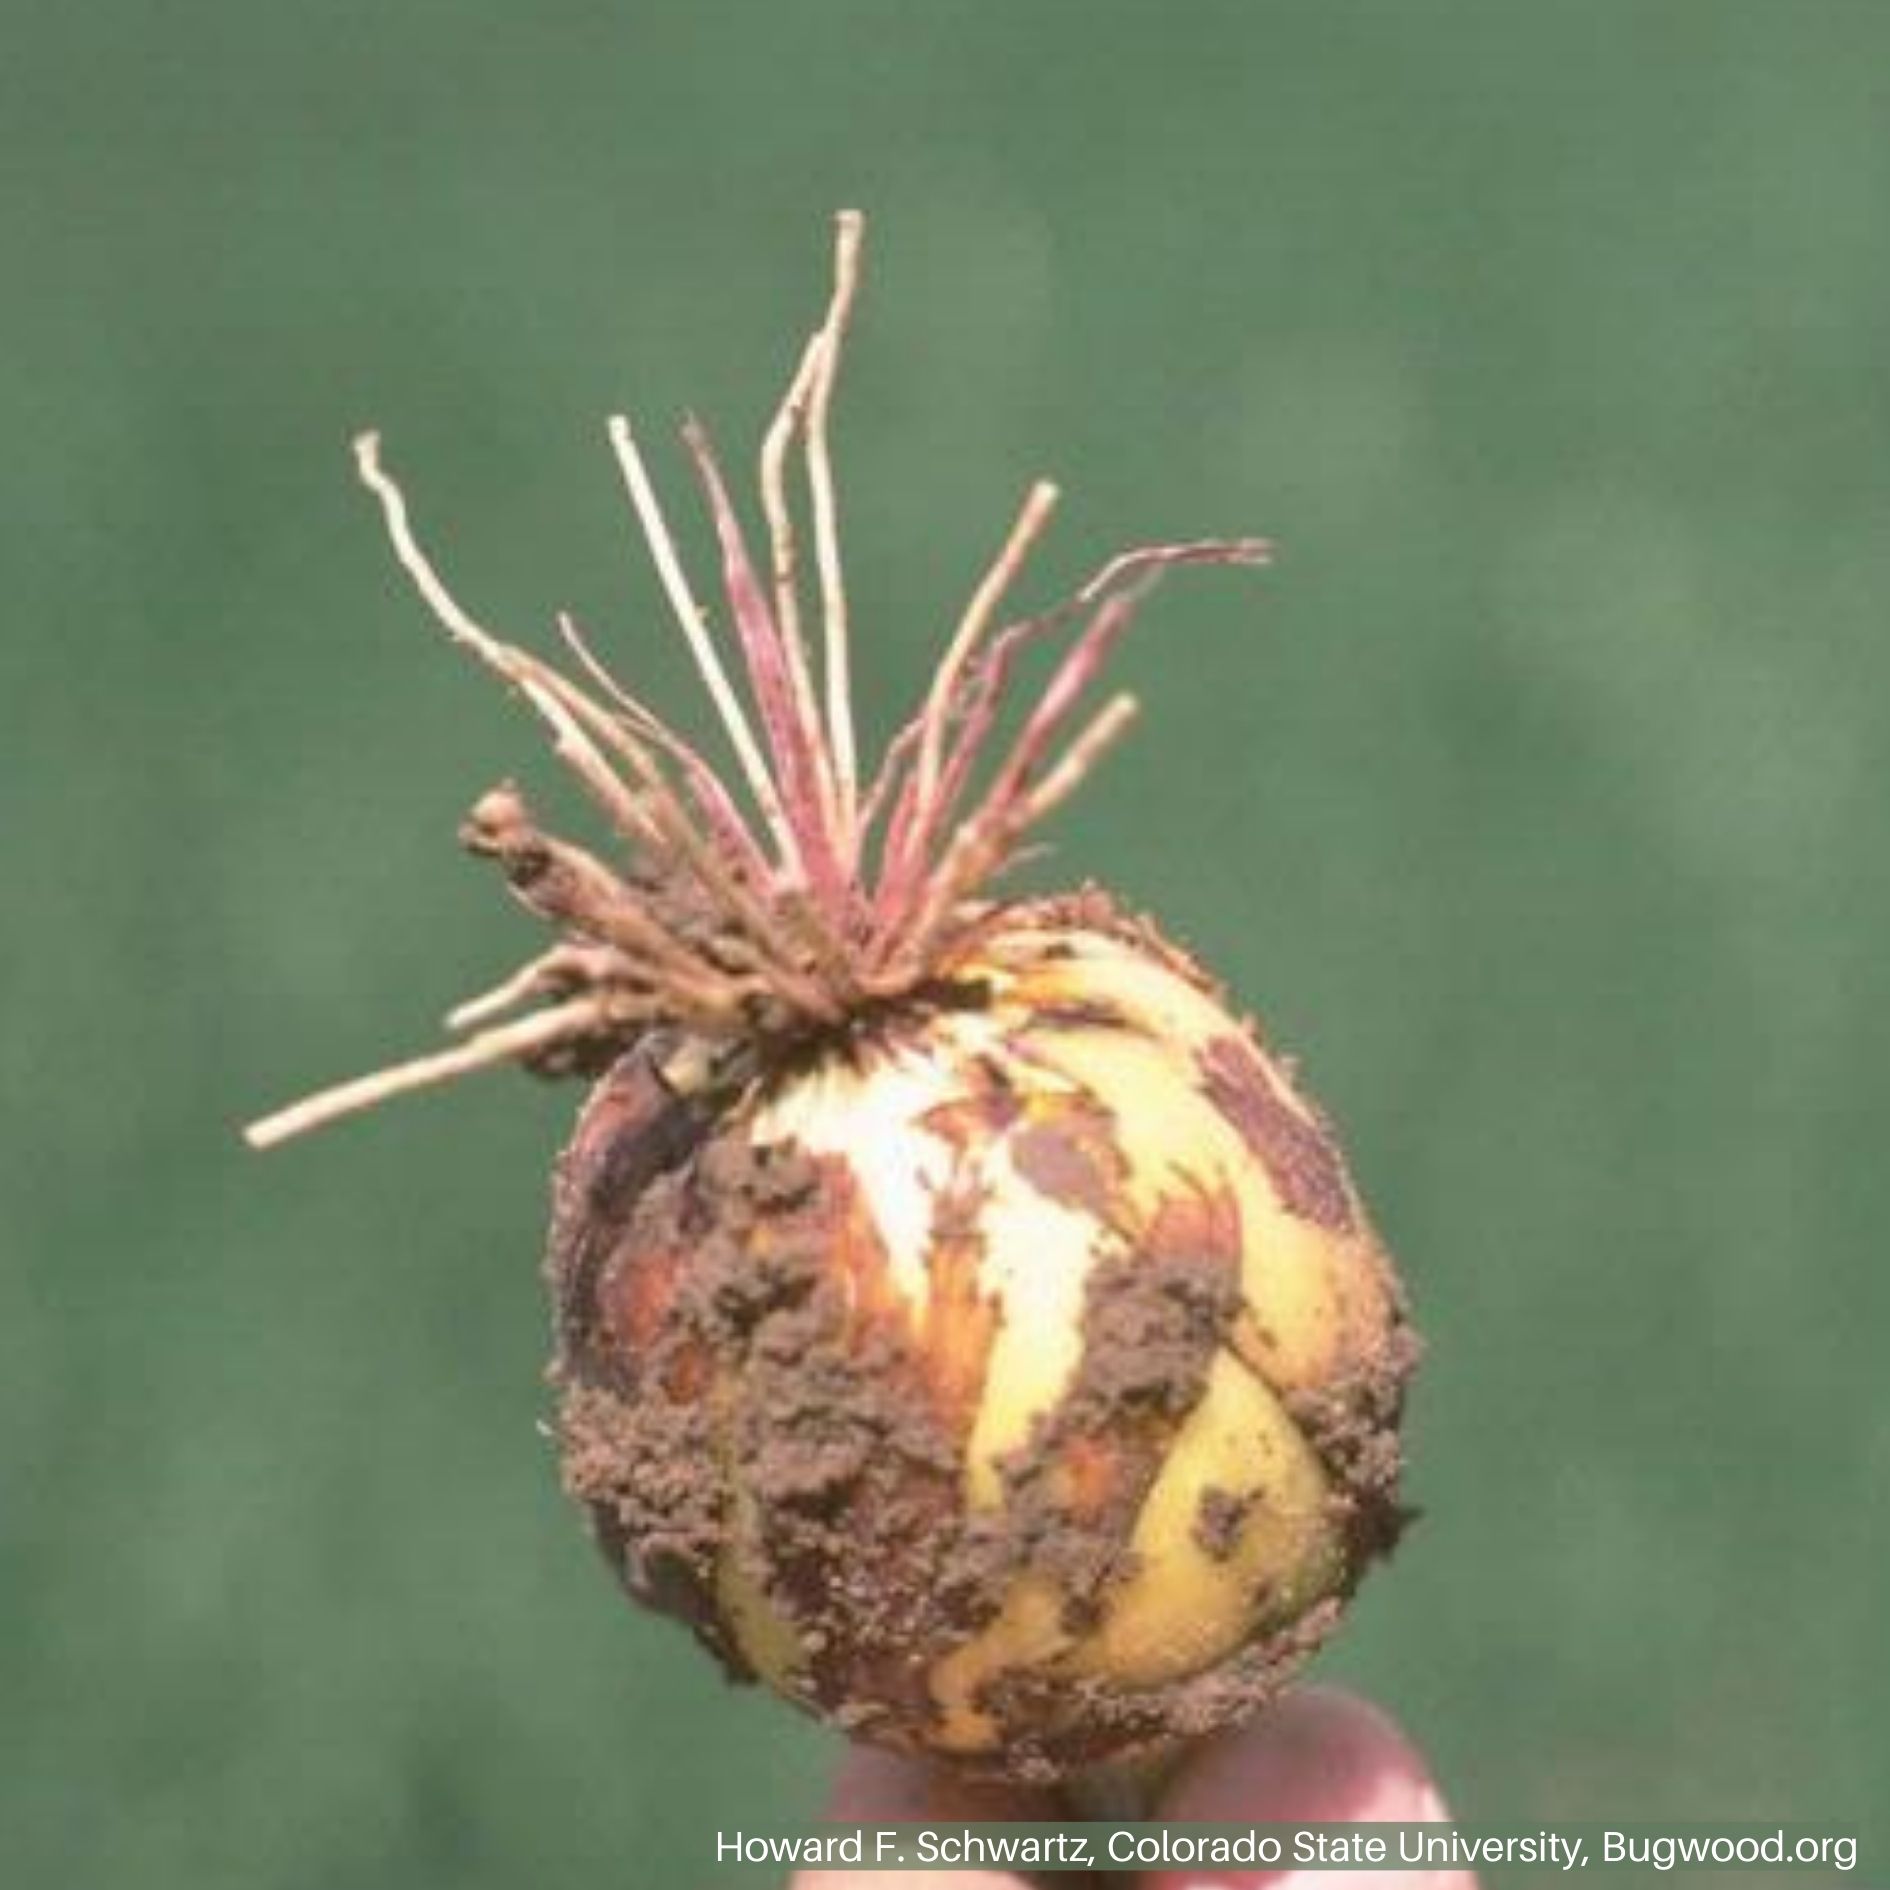 Onion Root with Symptoms of Pink Root Disease<br><h6>